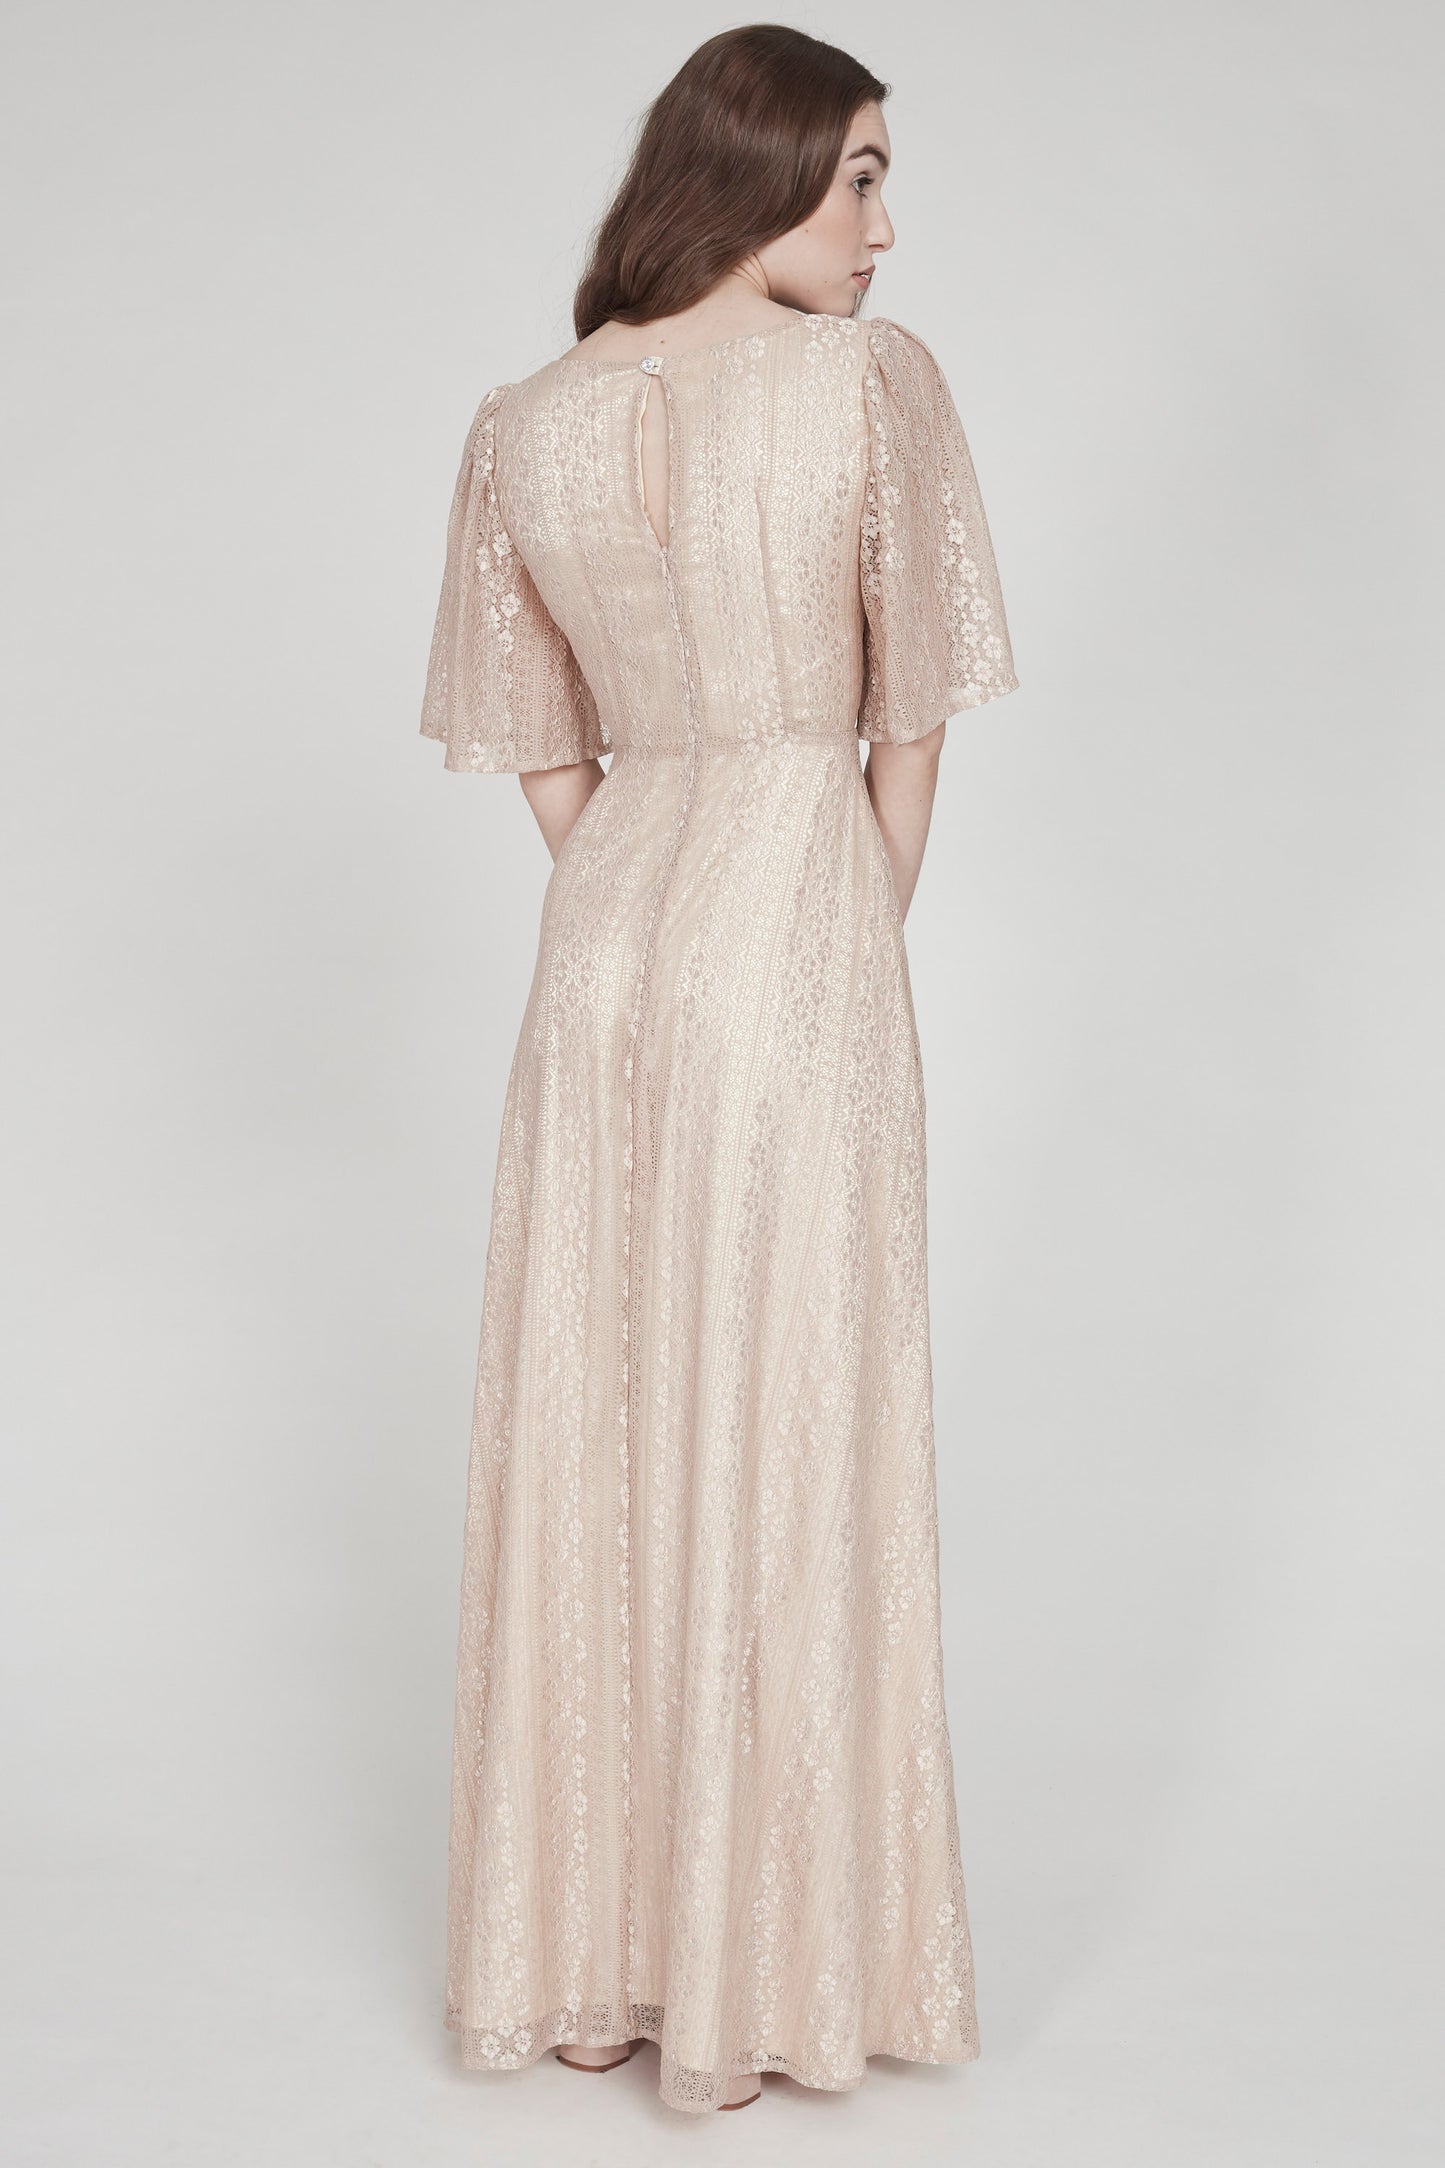 La Mer | Bell-Sleeved Lace Gown | Champagne